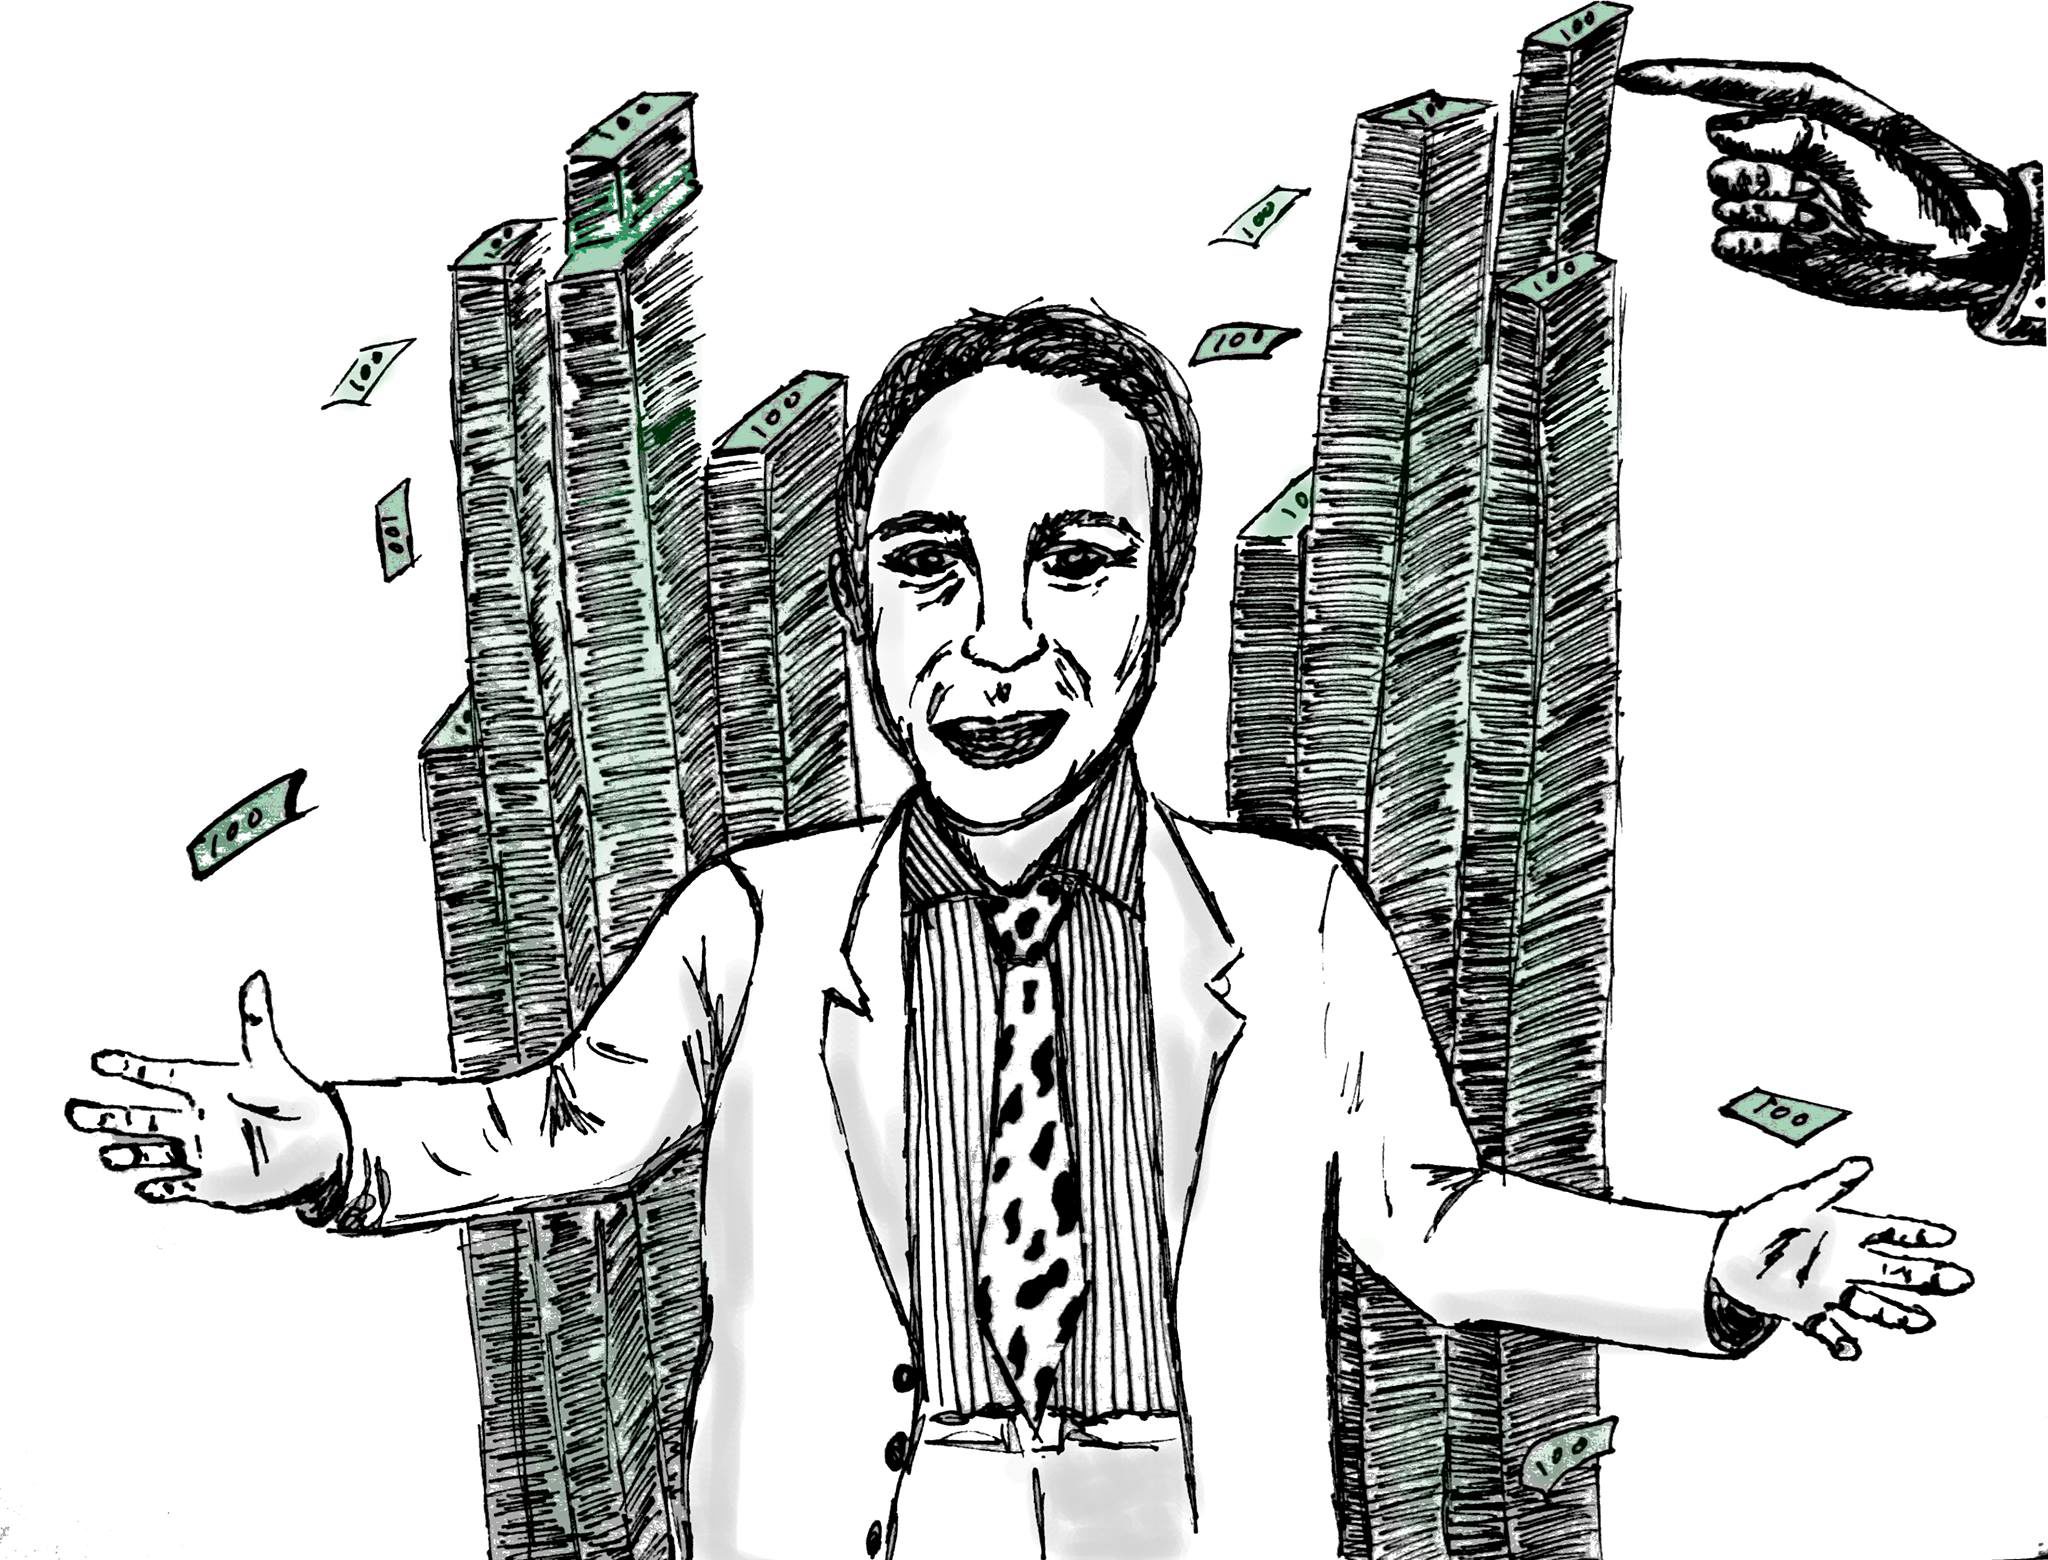 Illustration of man with stacks of money